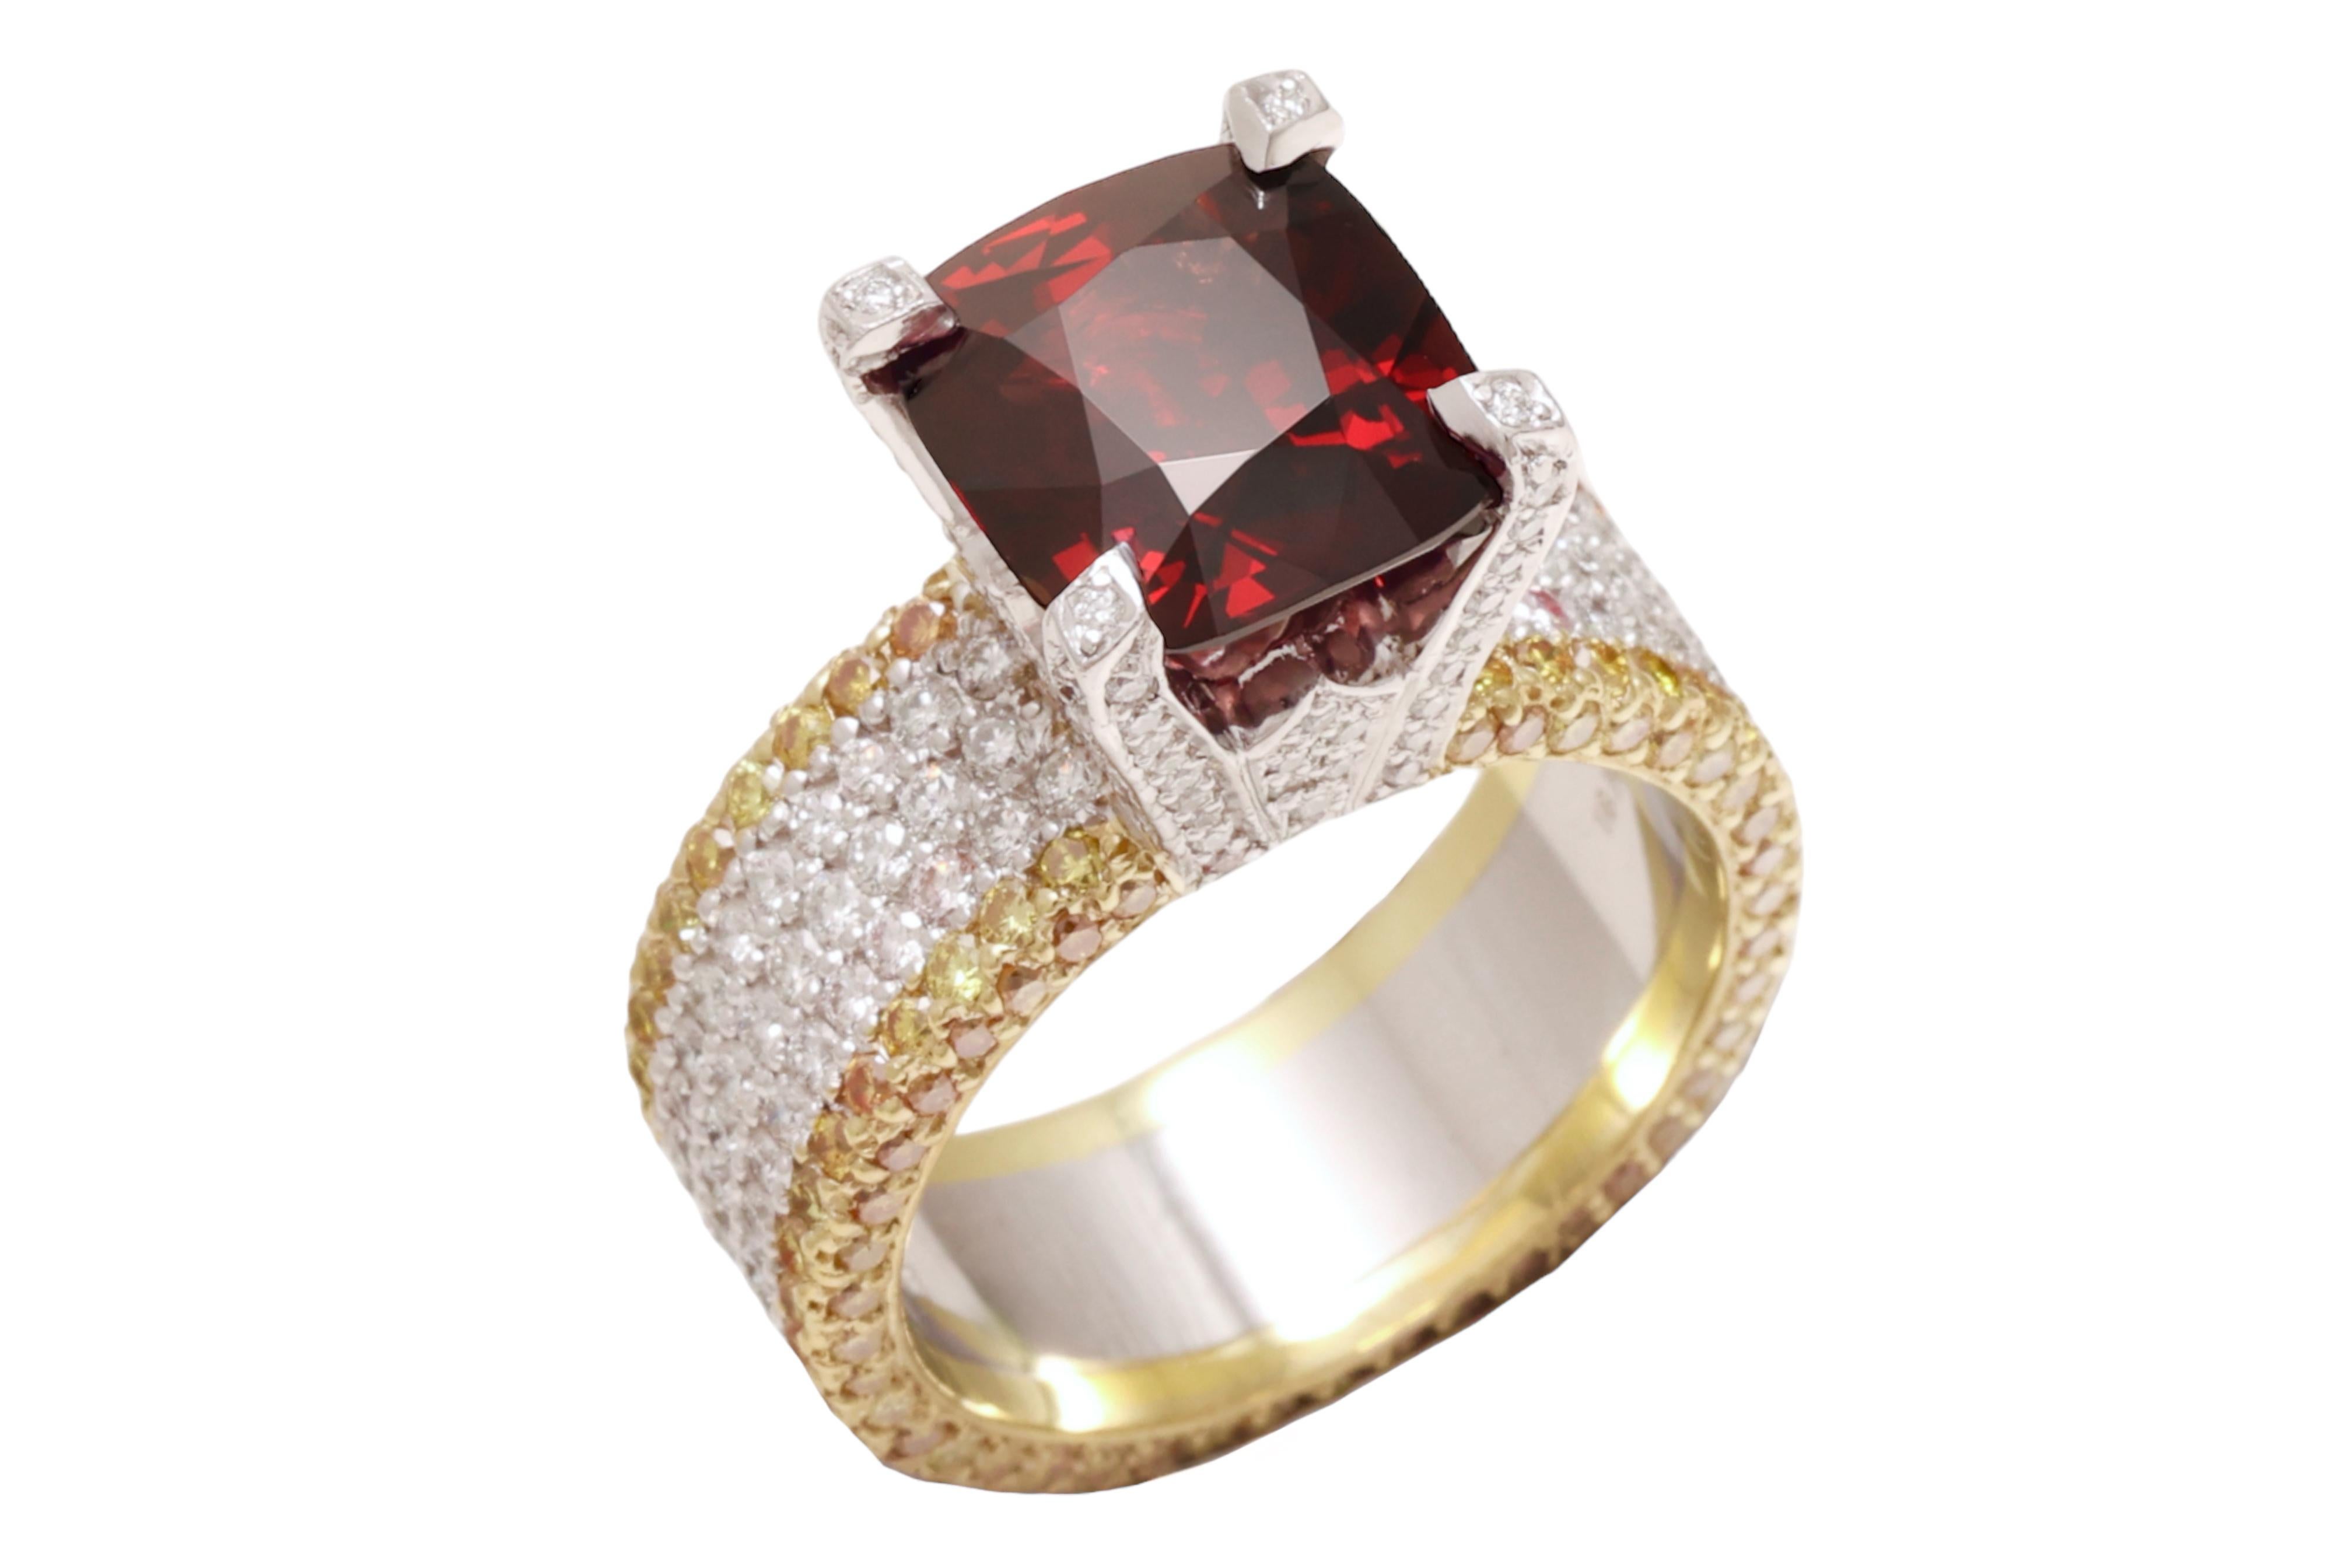 Magnificant Platinum & 18 kt. Yellow Gold Ring With 4.75 No Heat Pigeon Blood Burmese Spinel, 2.94 ct. Intense Fancy Yellow & White Diamonds


Spinel: Burmese Dark brownish - Red, Cushion shape, Brilliant / step cut Natural Spinel 4.75 ct. No